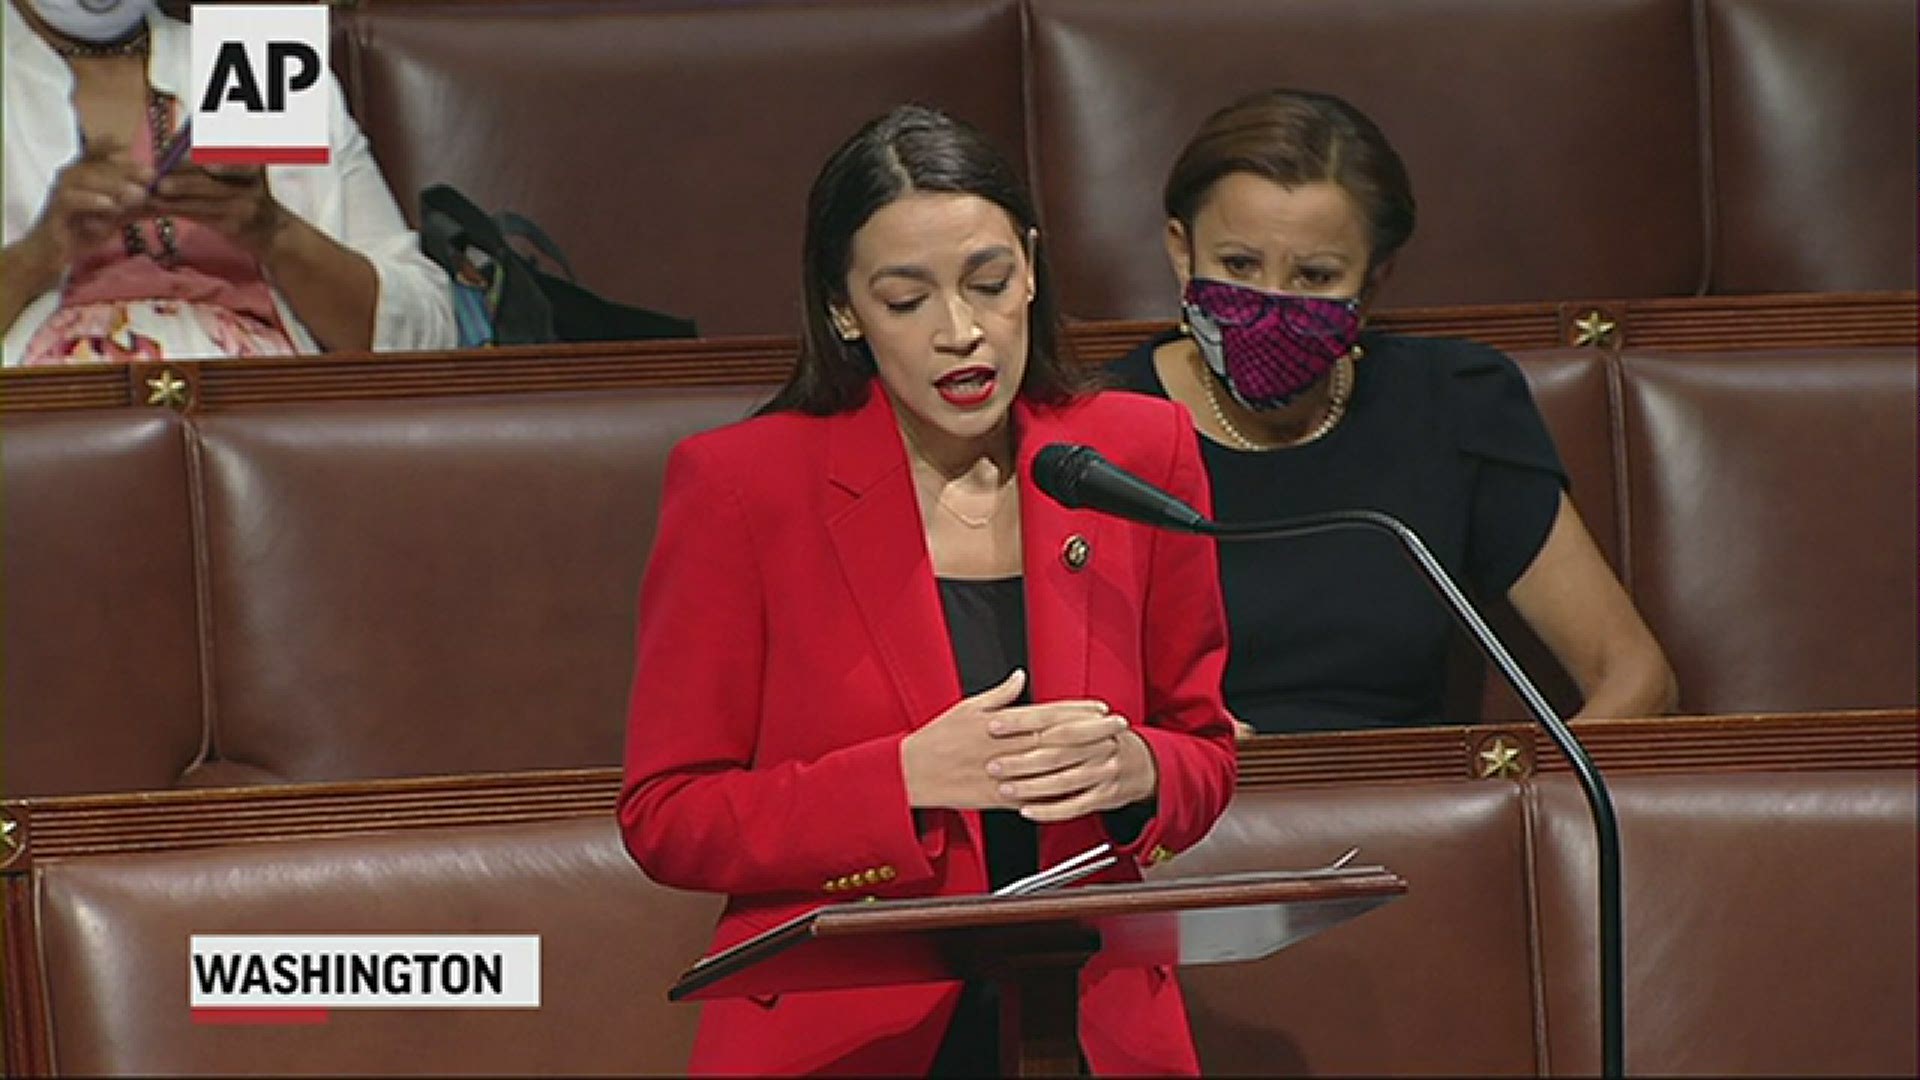 Ocasio-Cortez and other Democrats took to the House floor Thursday to demand an end to a sexist culture of “accepting violence and violent language against women.”